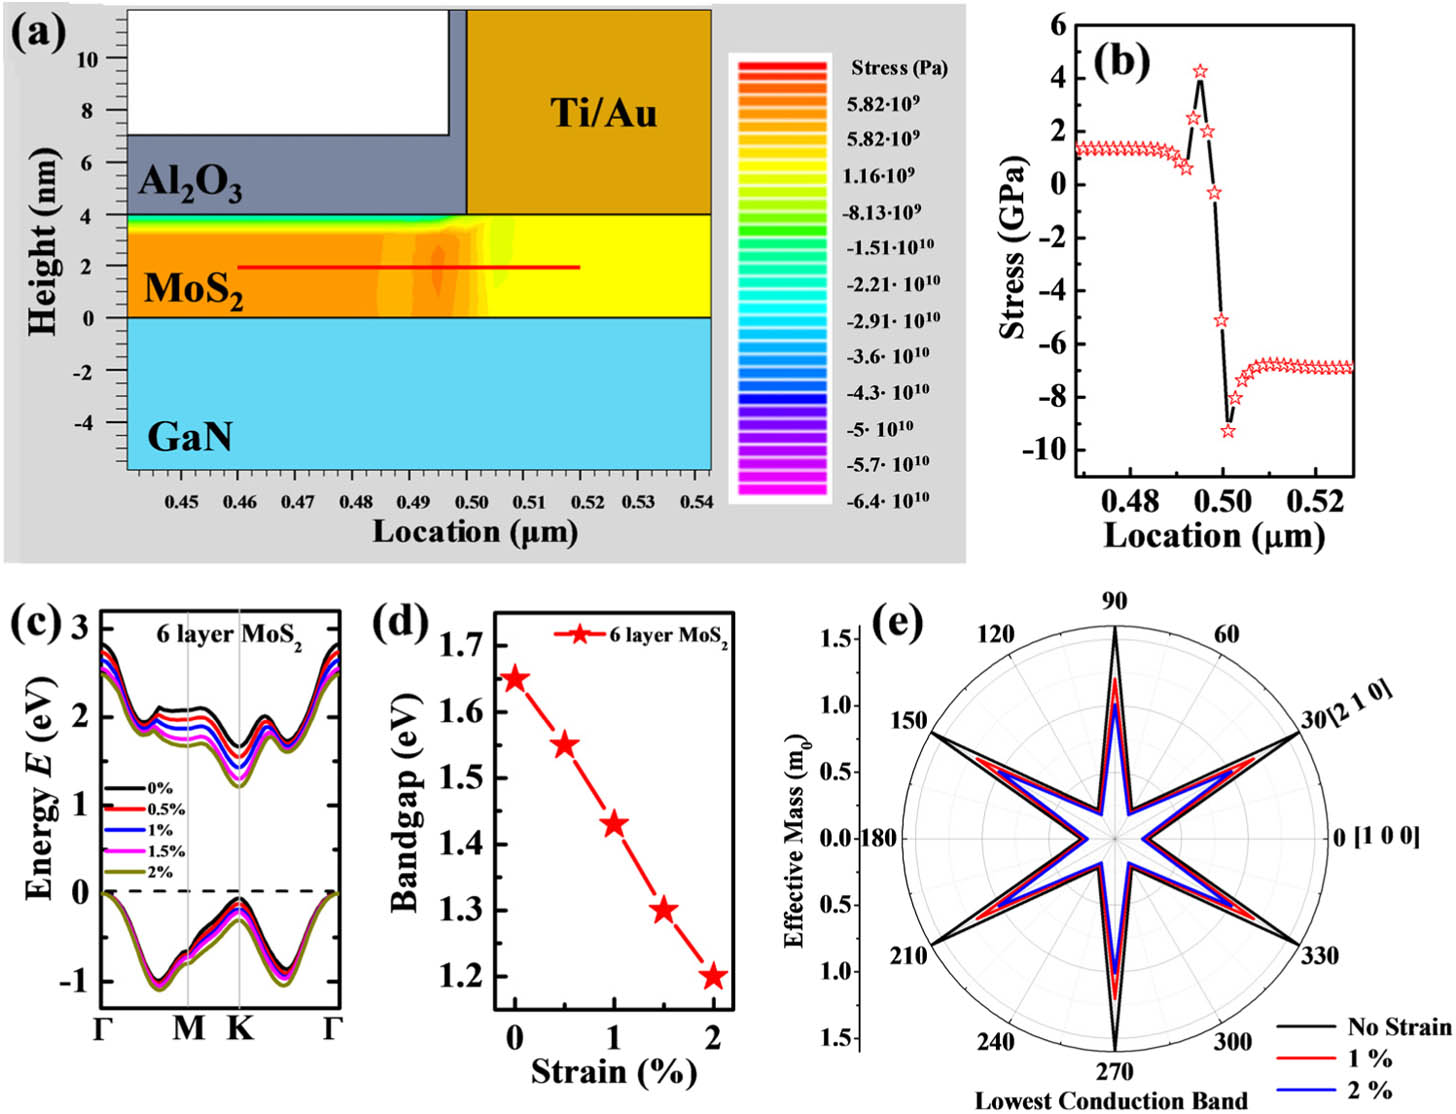 Simulation of multilayer MoS2 with tensile strain. (a) 2D stress mapping within the multilayer MoS2 (4 nm) photodetector with Al2O3 stress liner; (b) horizontal stress distribution within the multilayer MoS2 layer. Results of first-principles calculations: the variation of (c) the bottom of the conduction band and the top of the valence band, (d) bandgap, and (e) electron effective mass under different tensile strain on six-layer MoS2.